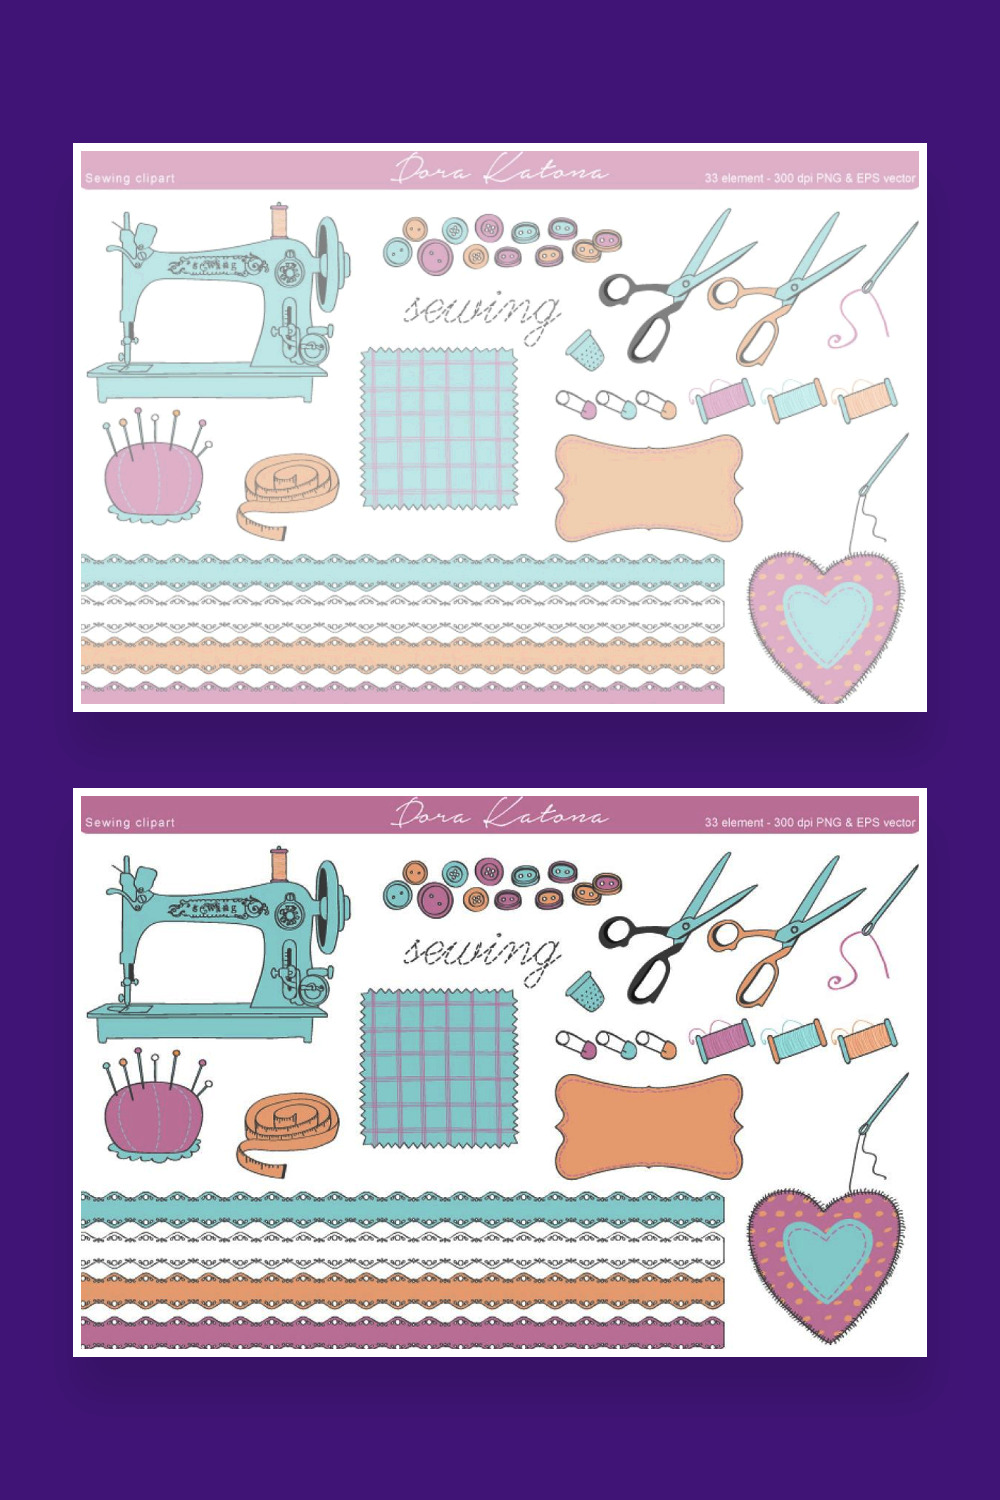 Sewing clipart pinterest.